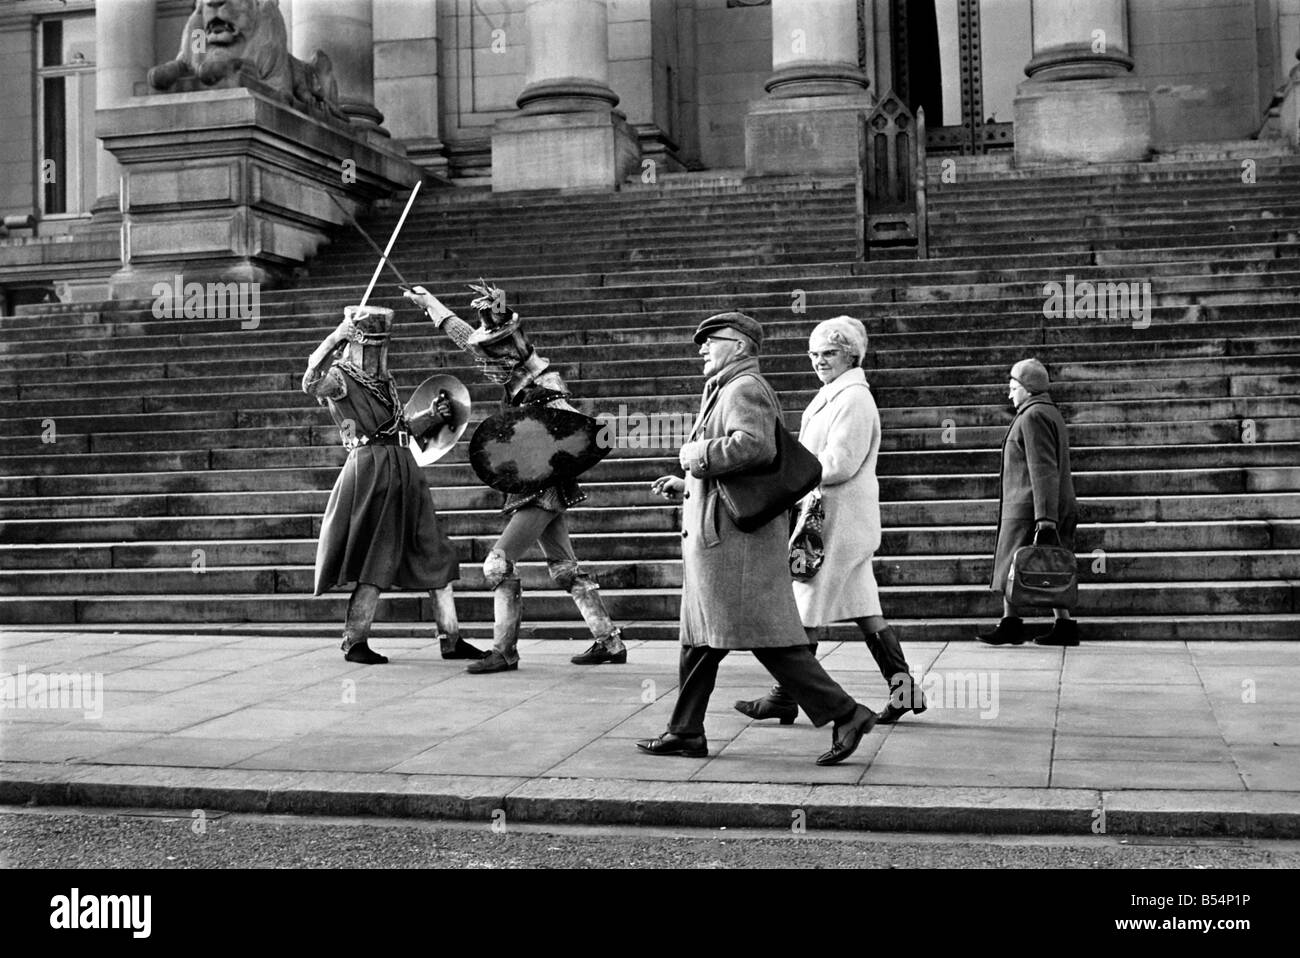 Shoppers hurry past the Town Hall steps as a couple of medieval knights are locked in combat in Bolton. The battle was being filmed by the Bolton Octagan Theatre Company. December 1969 Z11749-001 Stock Photo